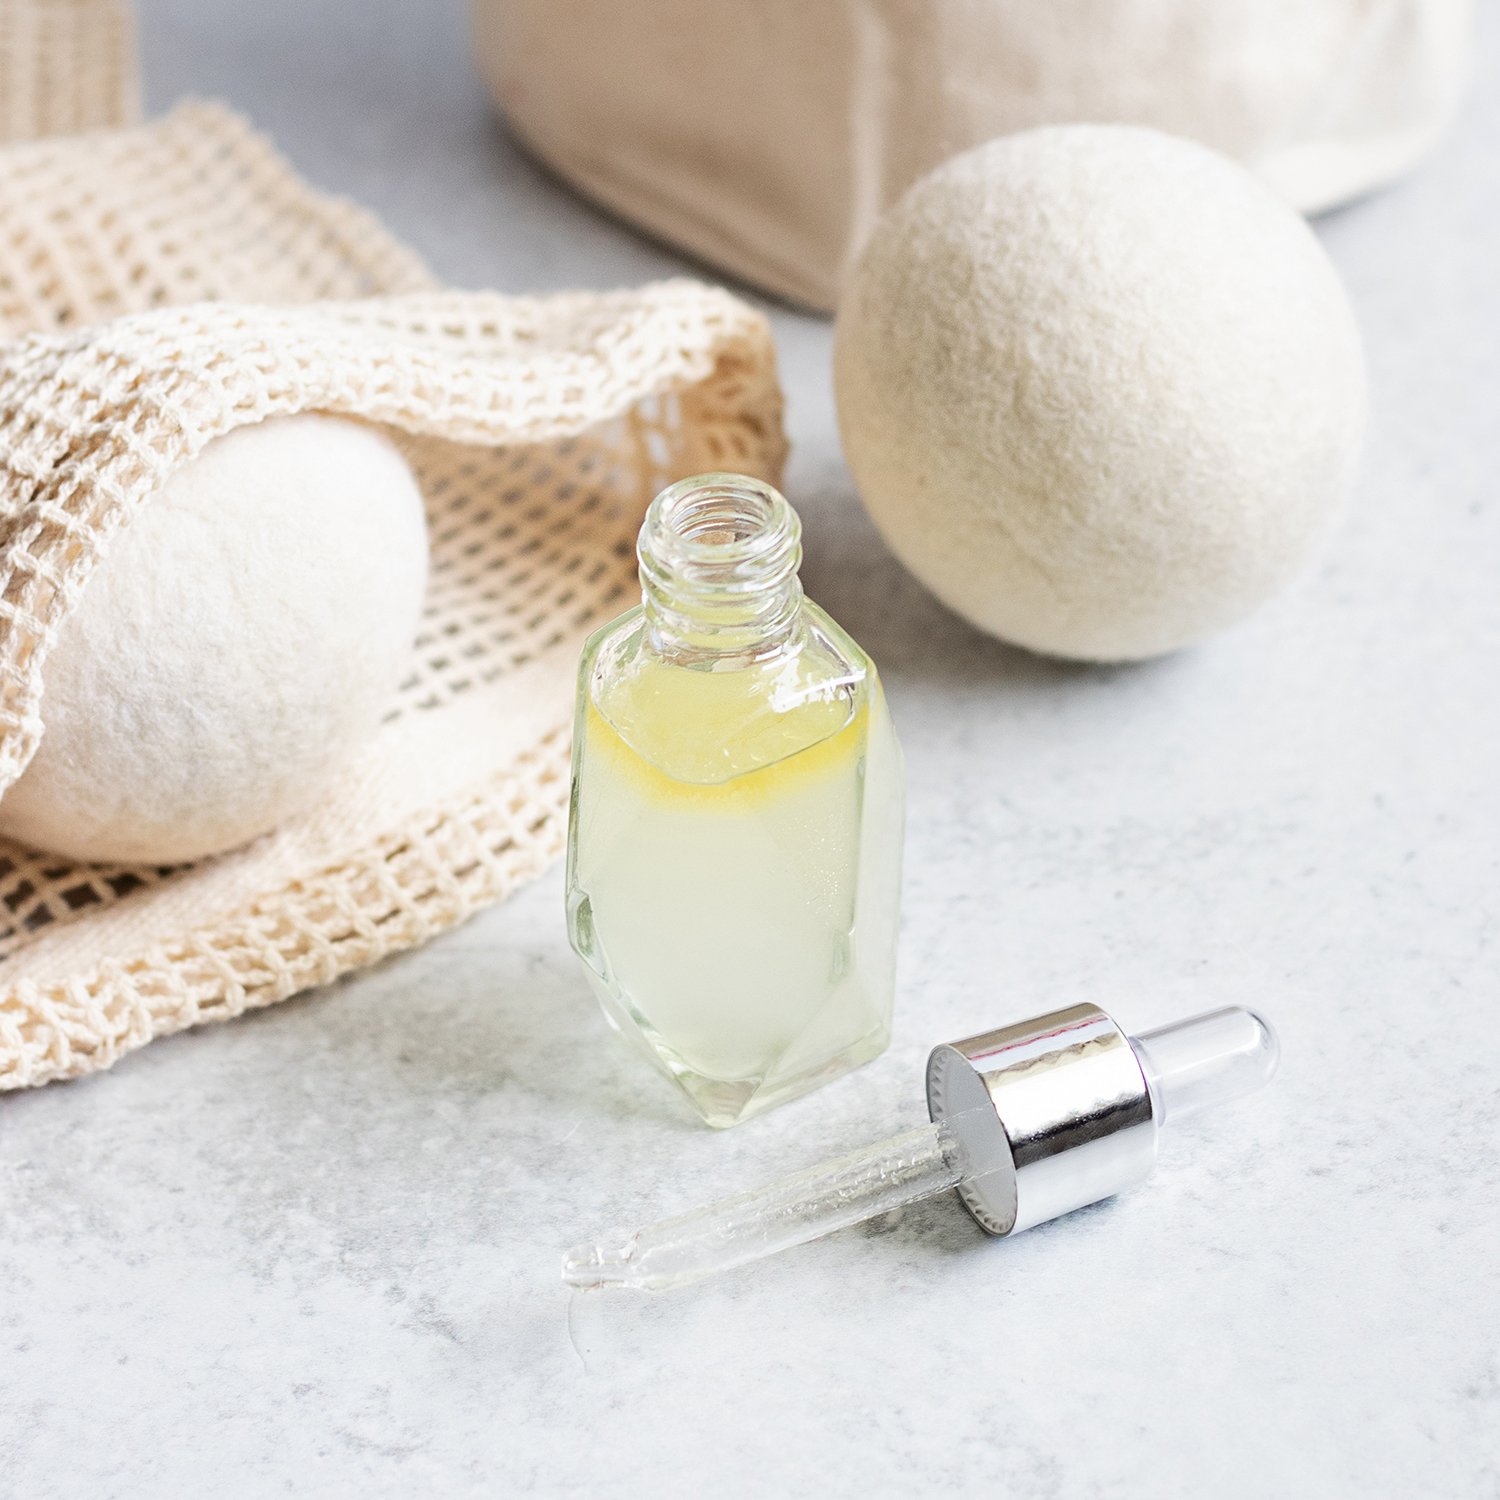 How to use wool dryer balls with essential oils. So easy!!